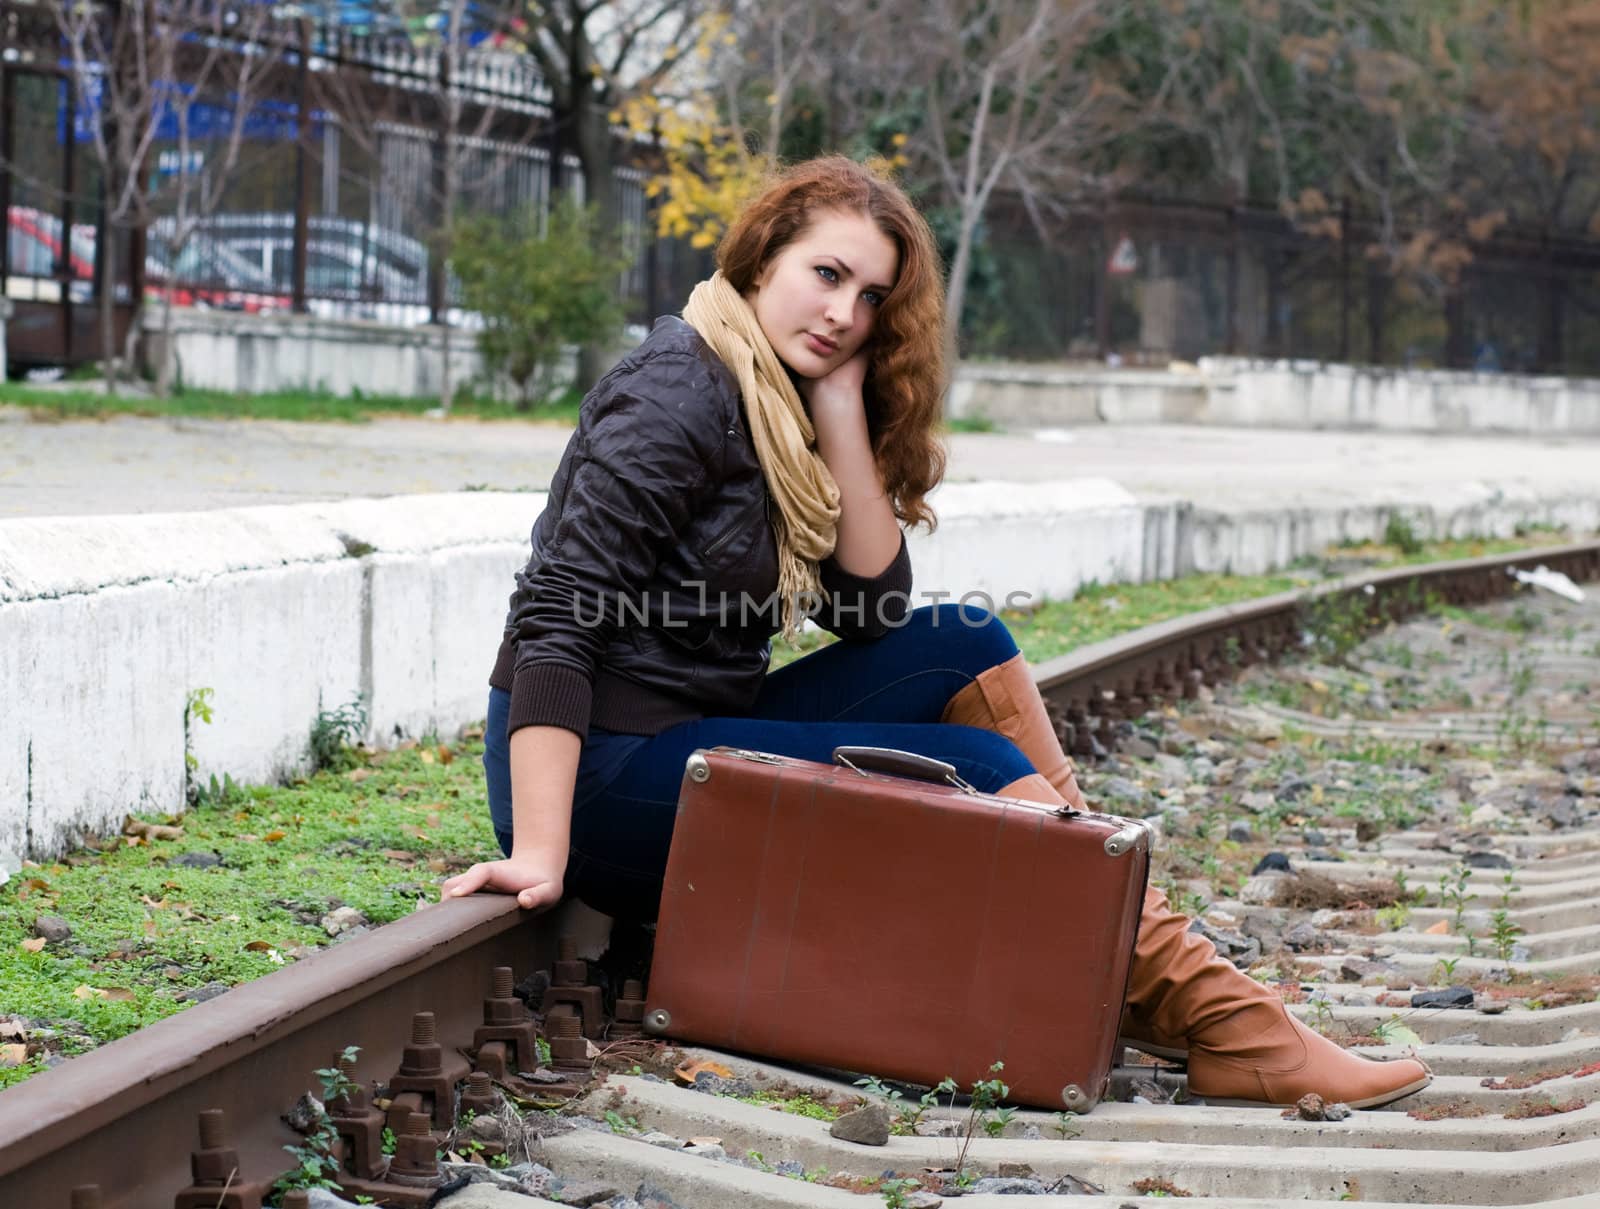 Beautiful girl sitting on a suitcase along the train tracks